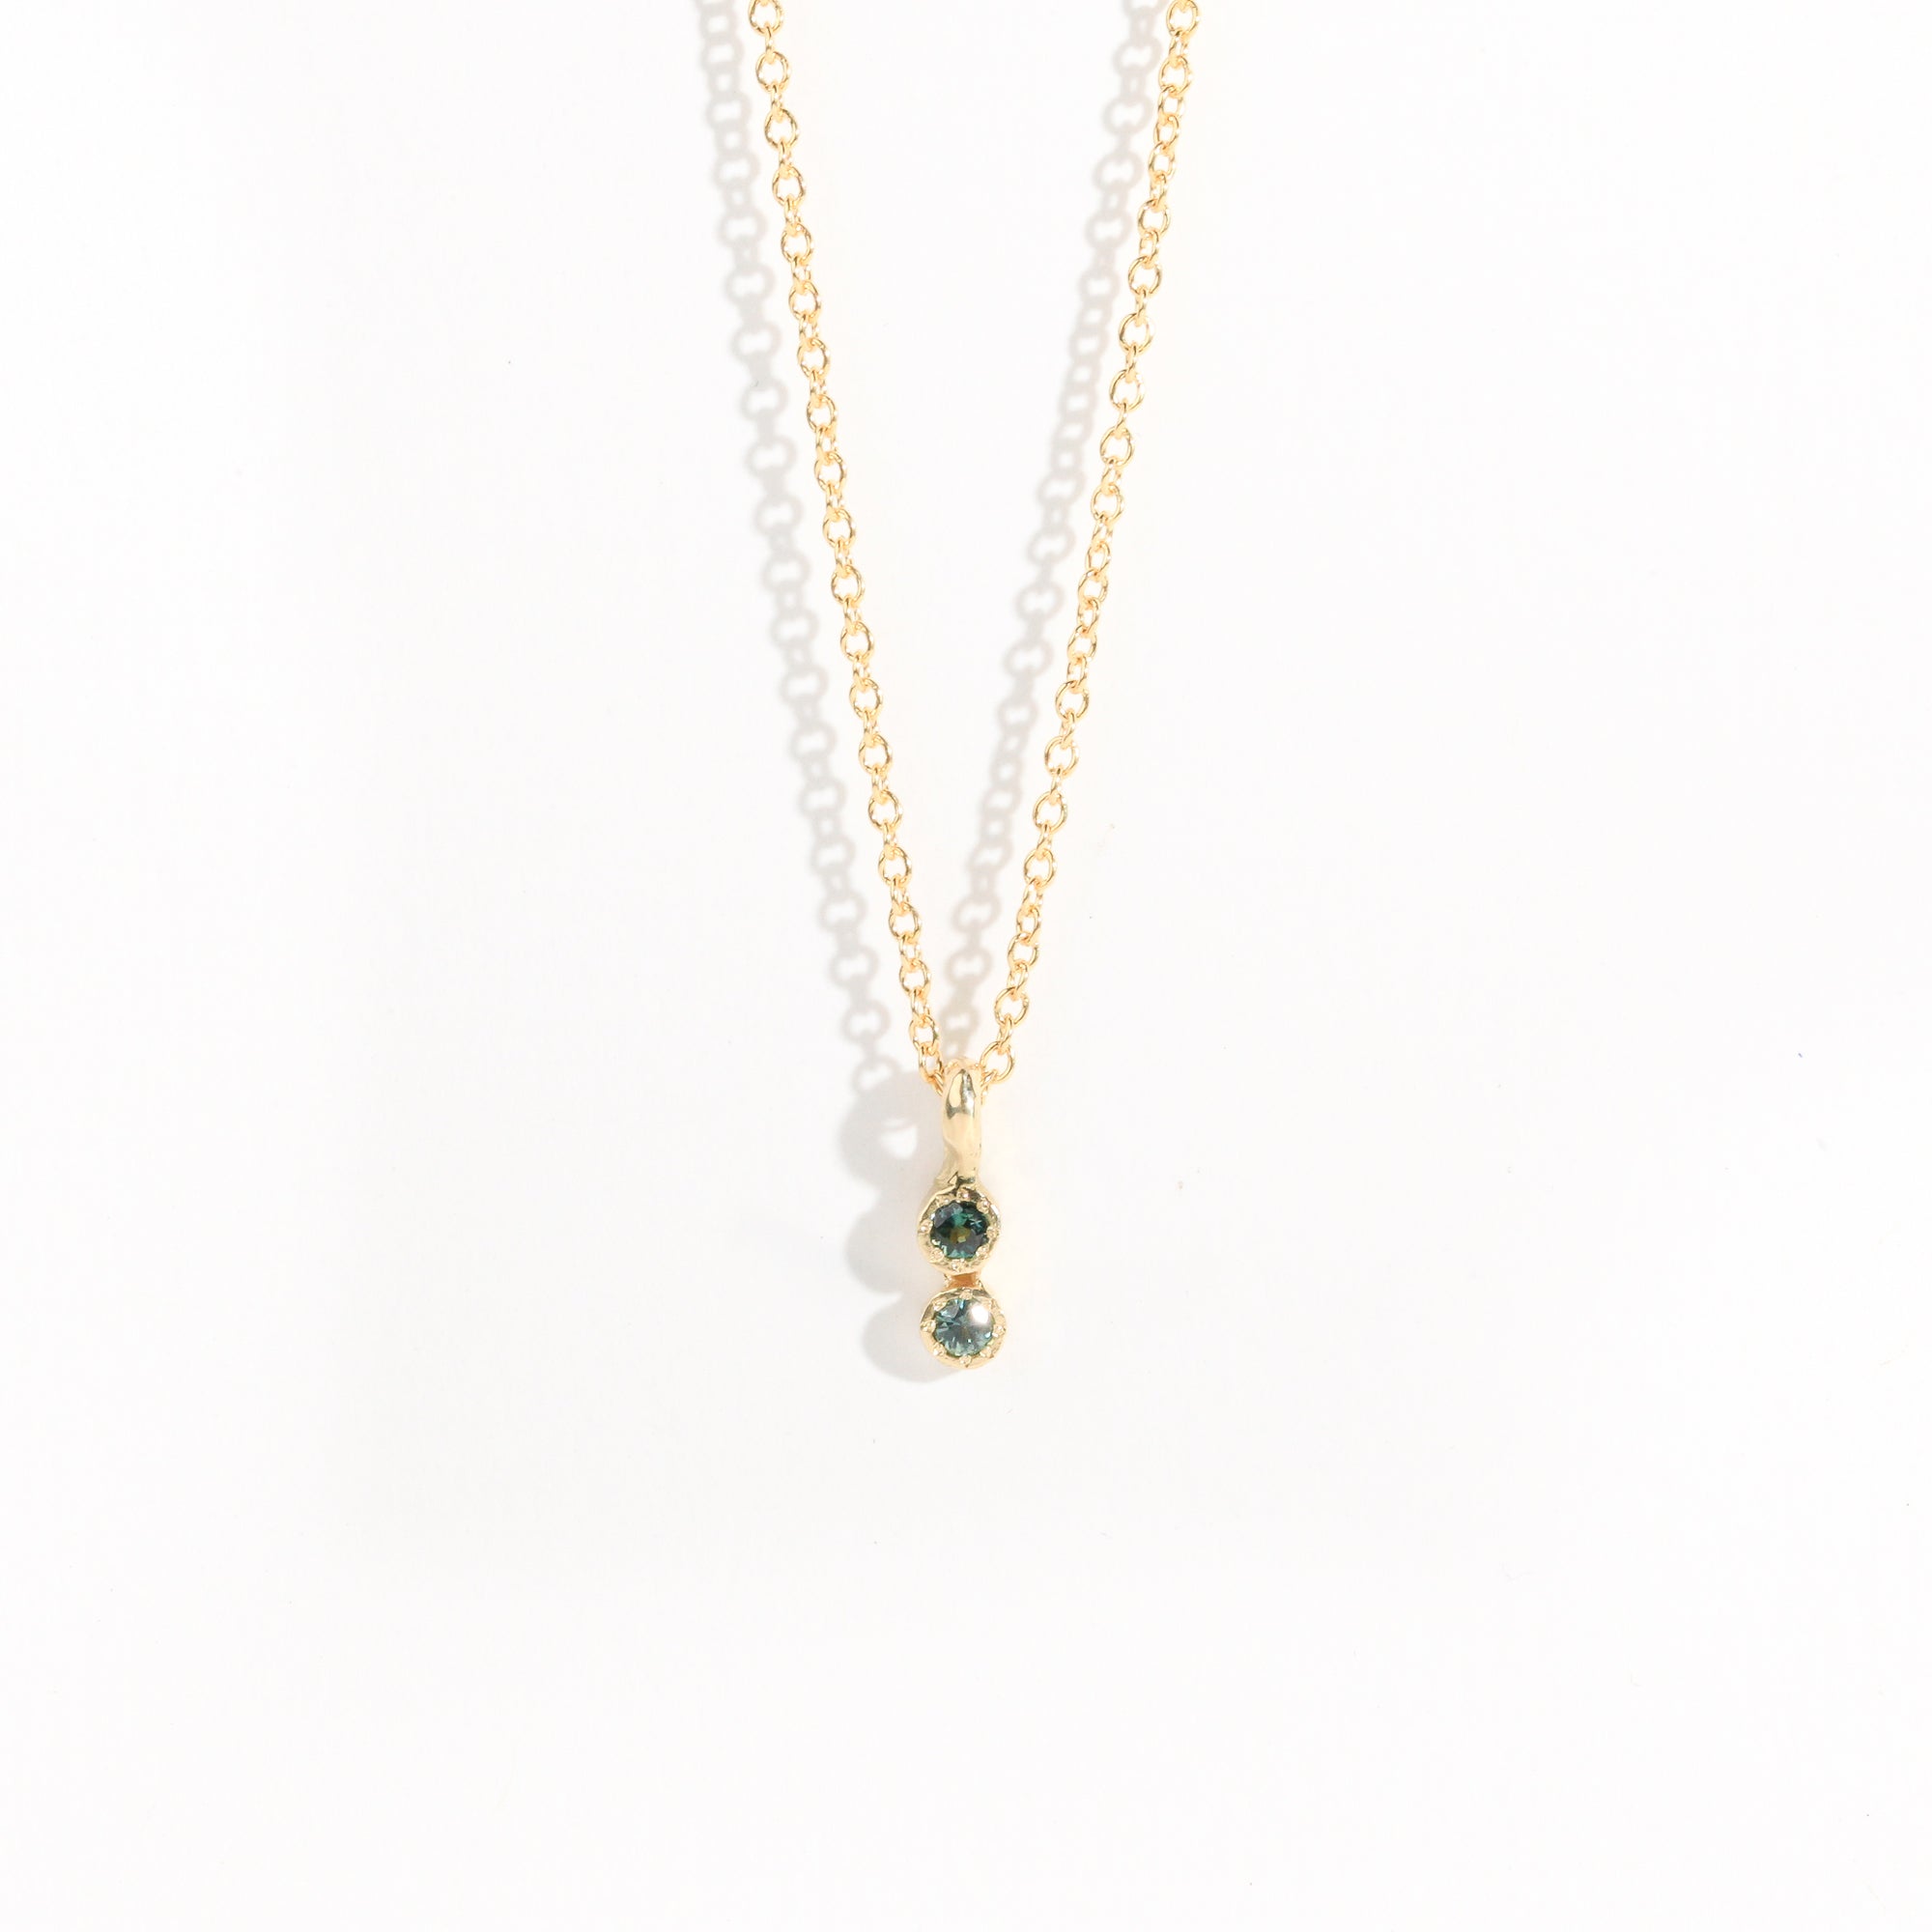 Petite two stone pendant with ethically sourced Australian sapphires crafted in yellow gold by Black Finch